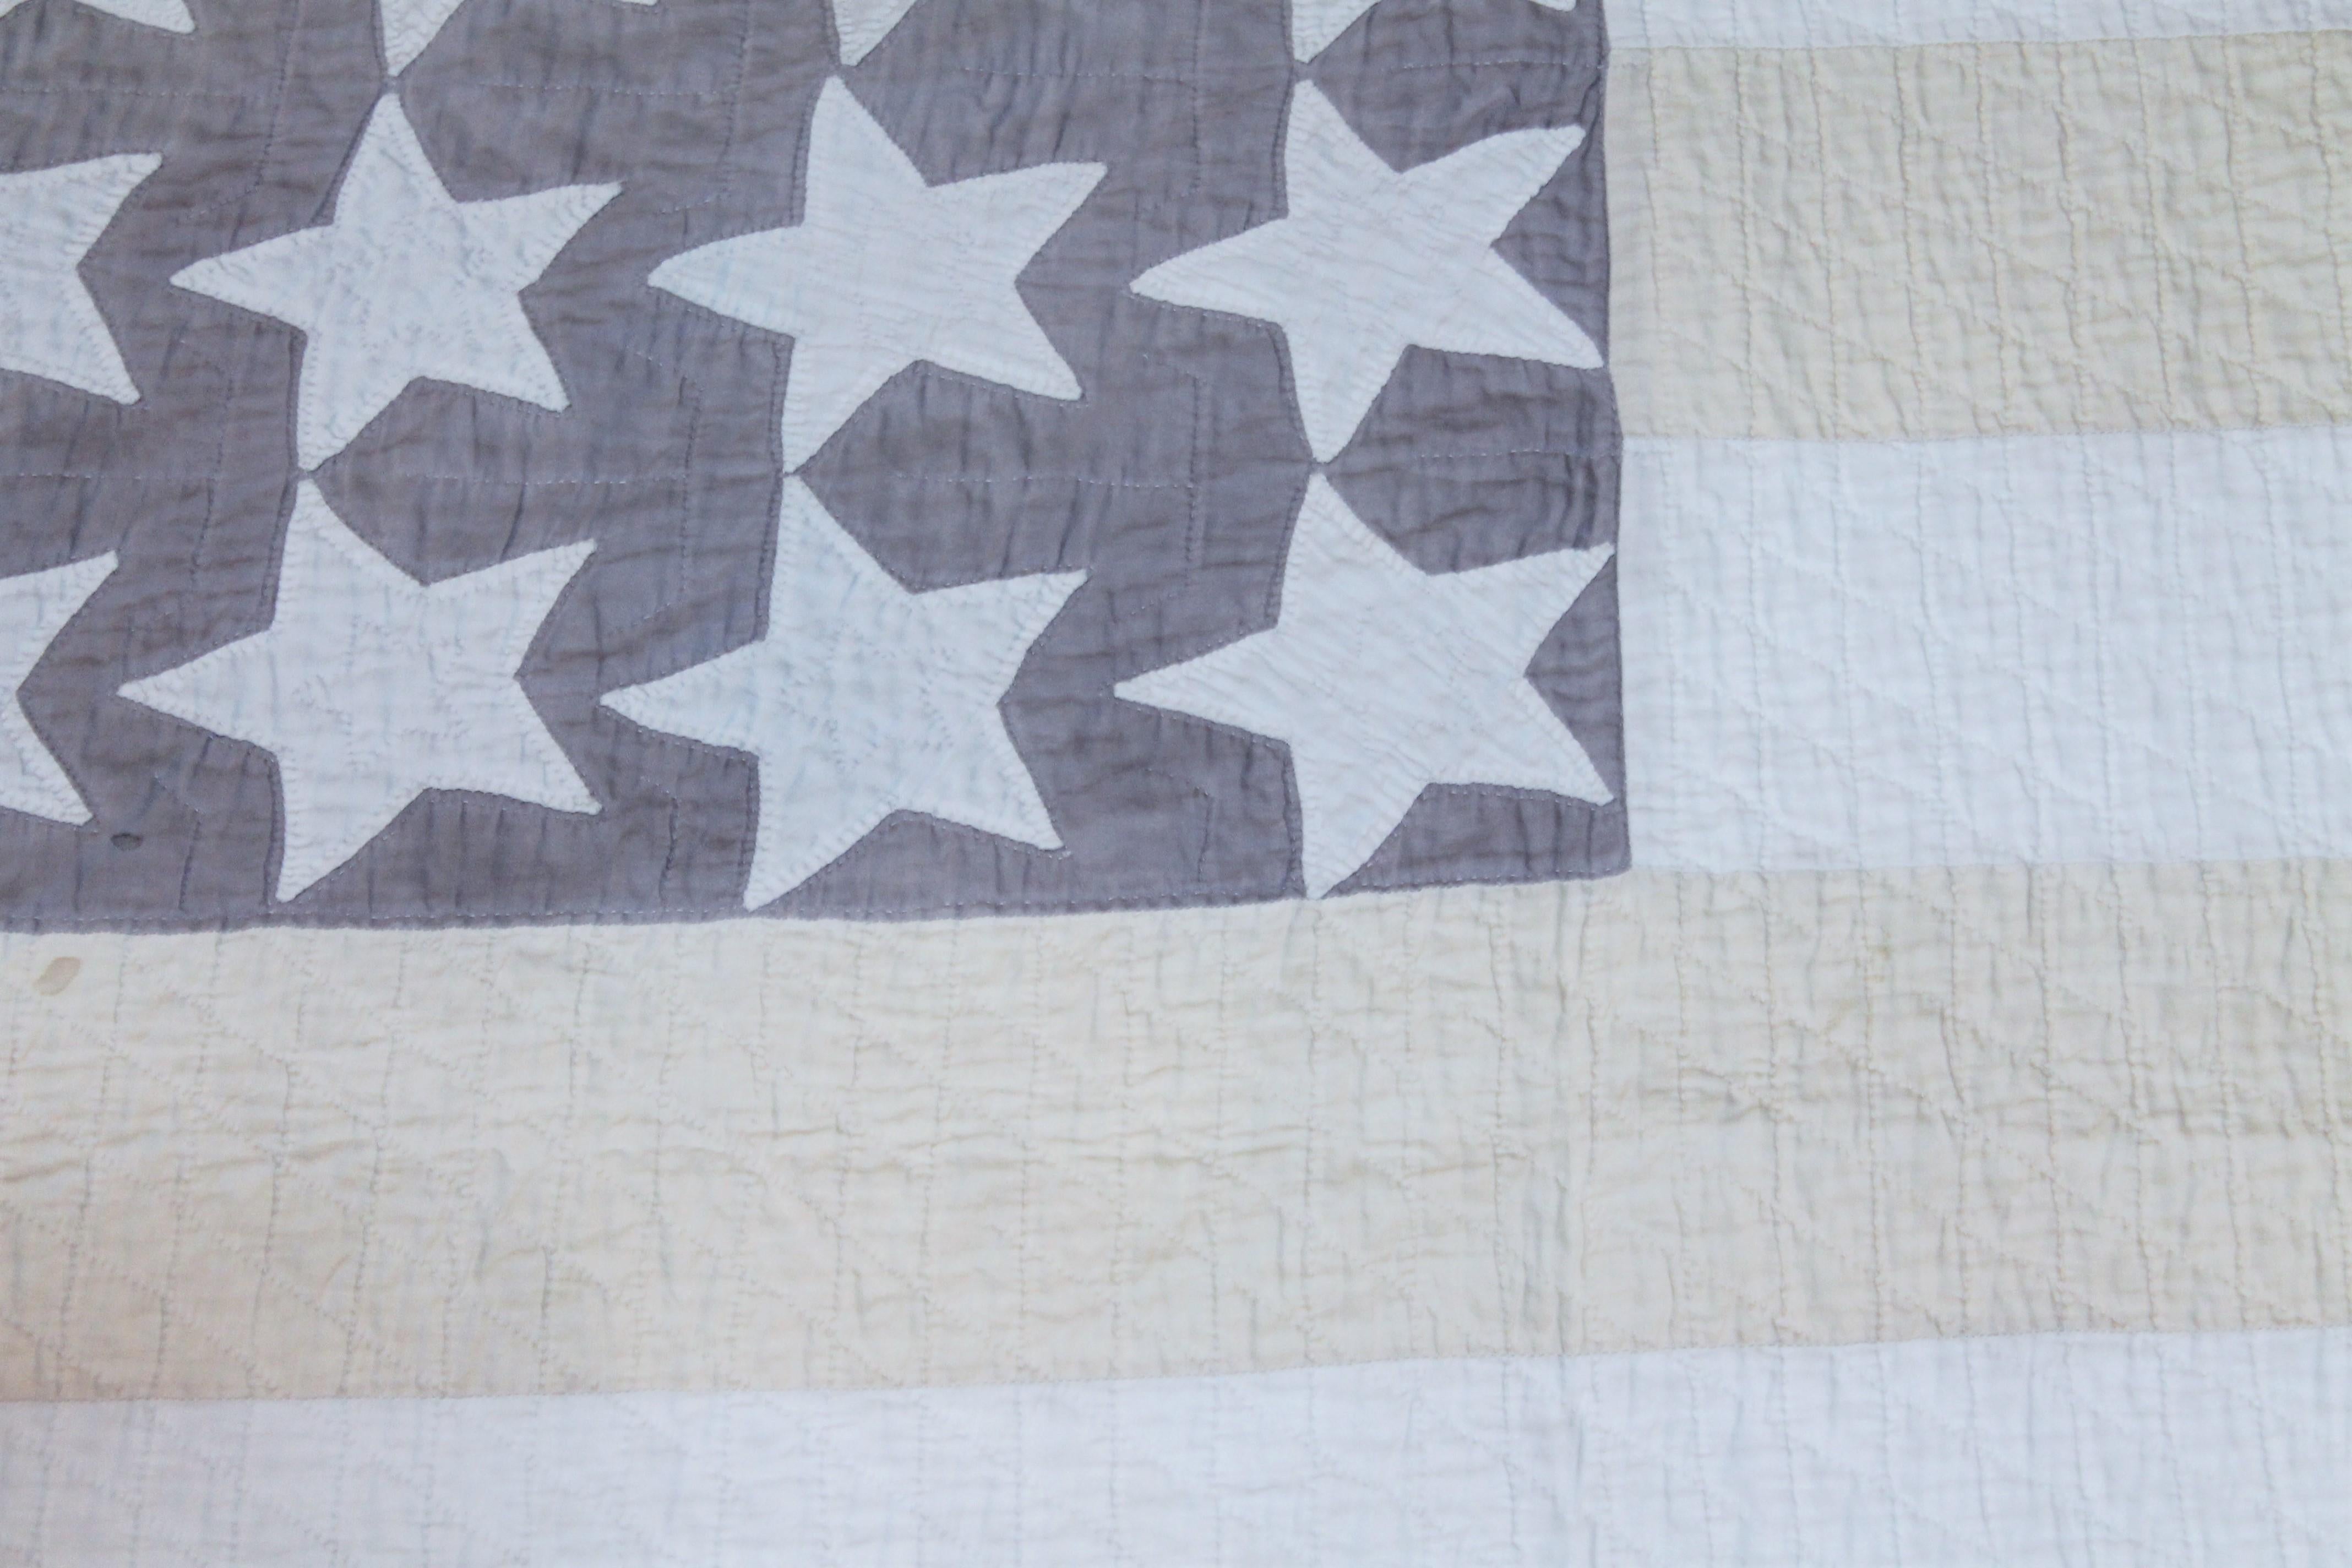 American Antique Flag Quilt from 1915 Hand Sewn Stars